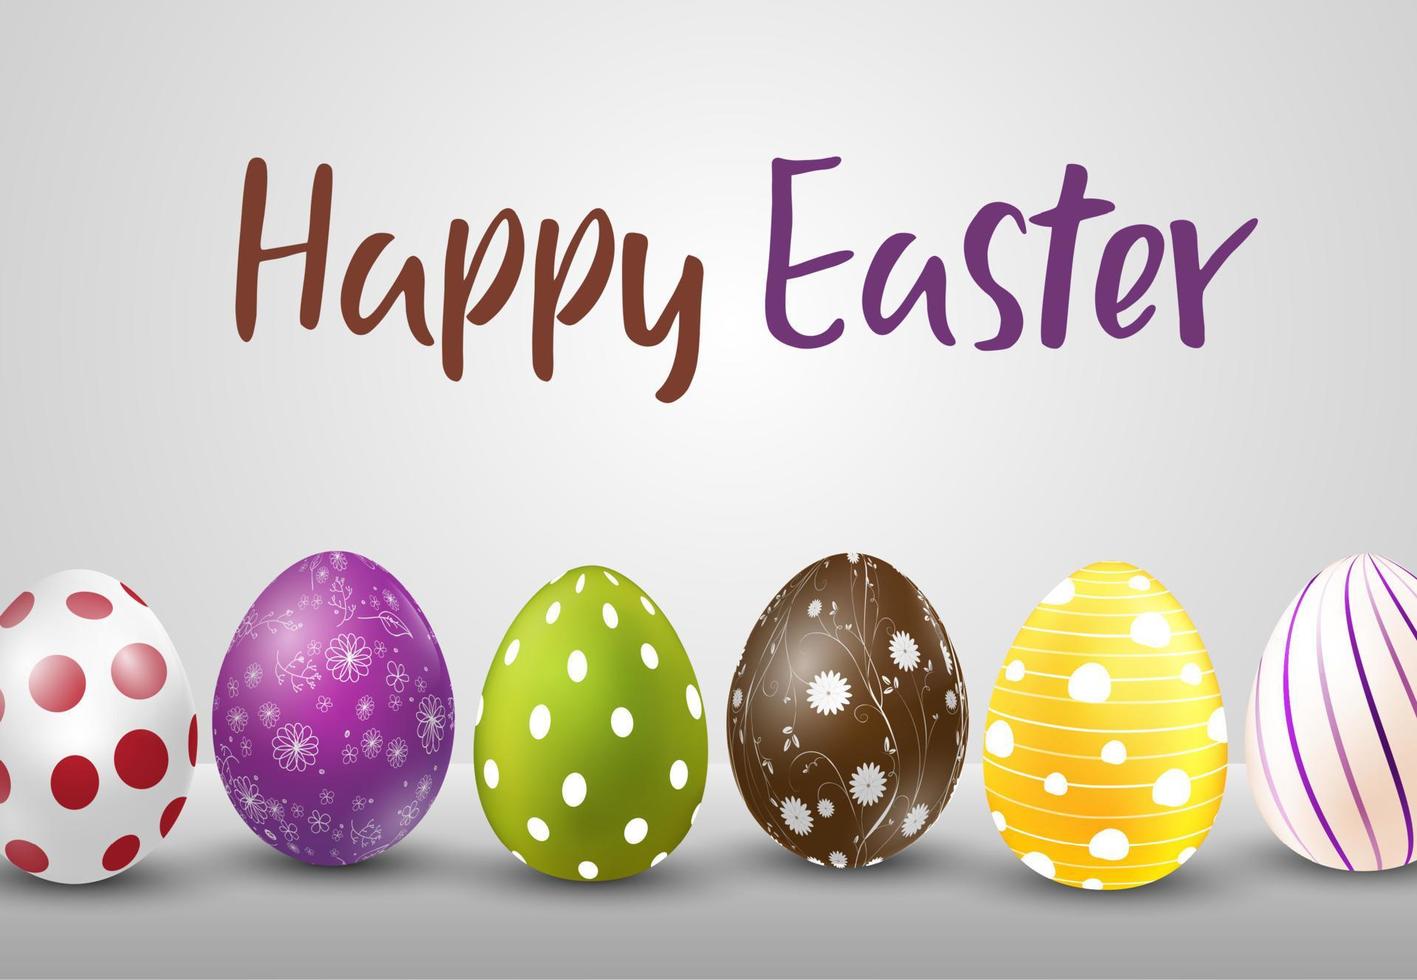 Happy Easter background with colorful eggs vector